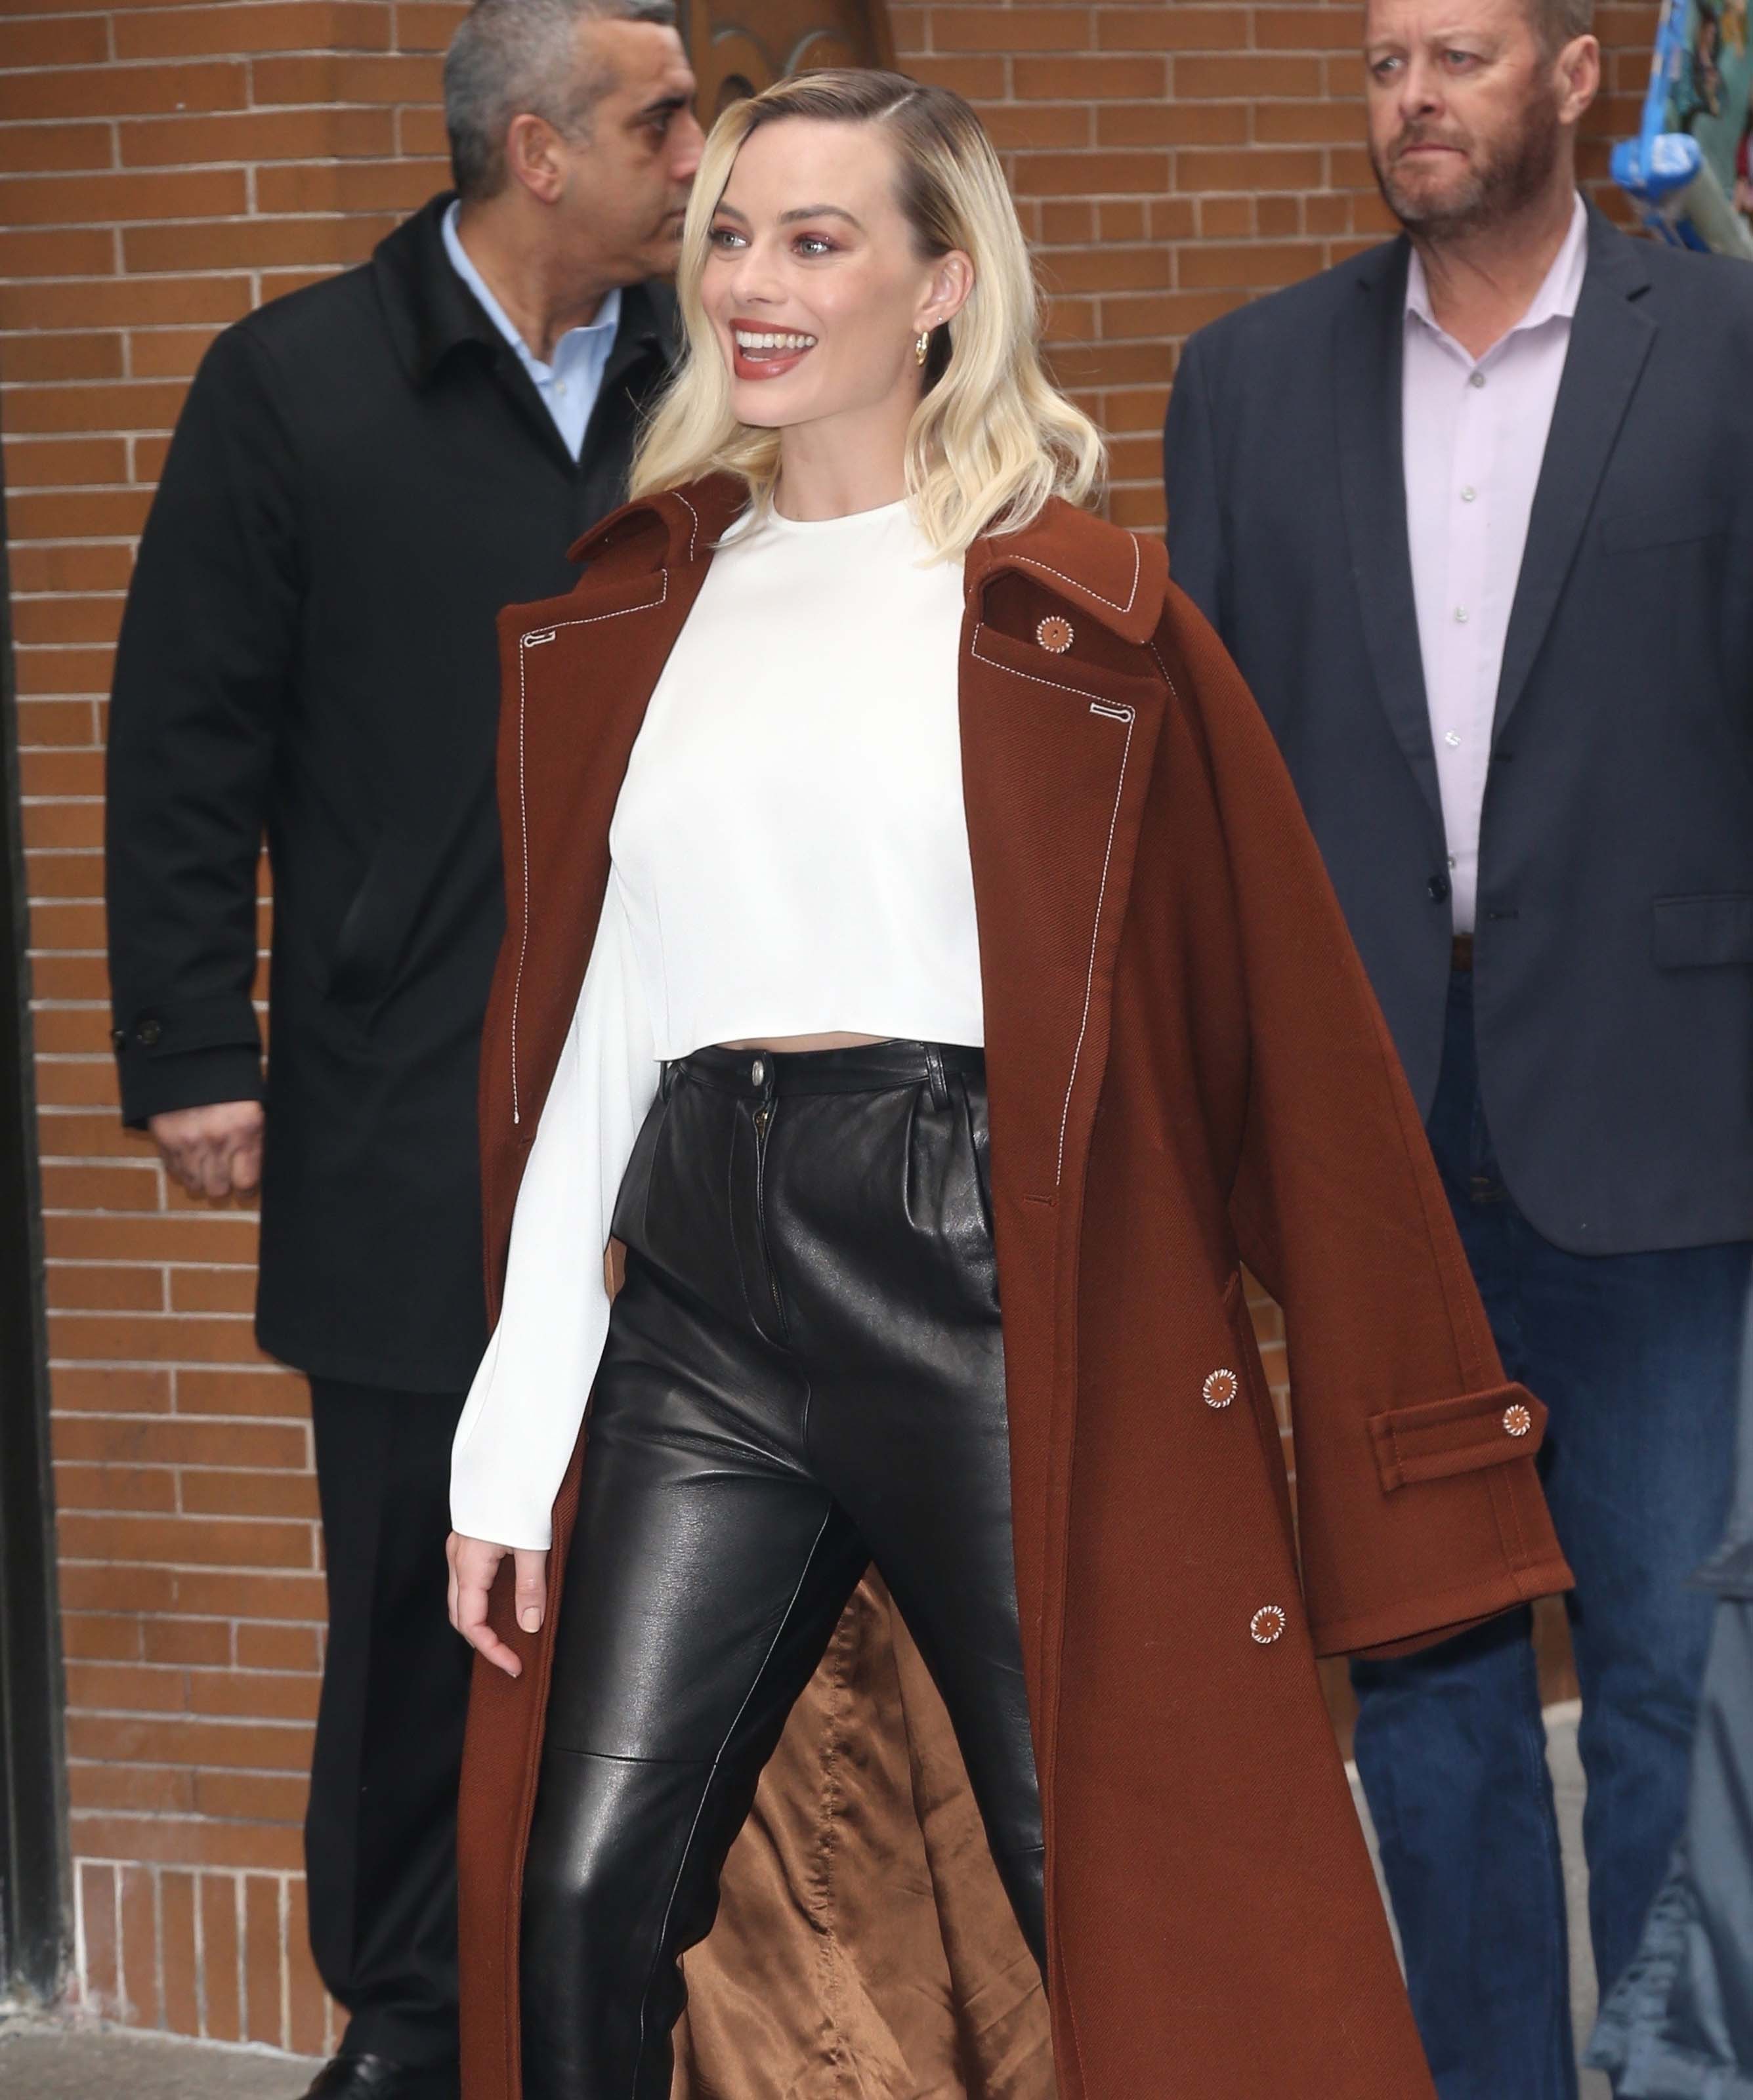 Margot Robbie doing promo in NYC